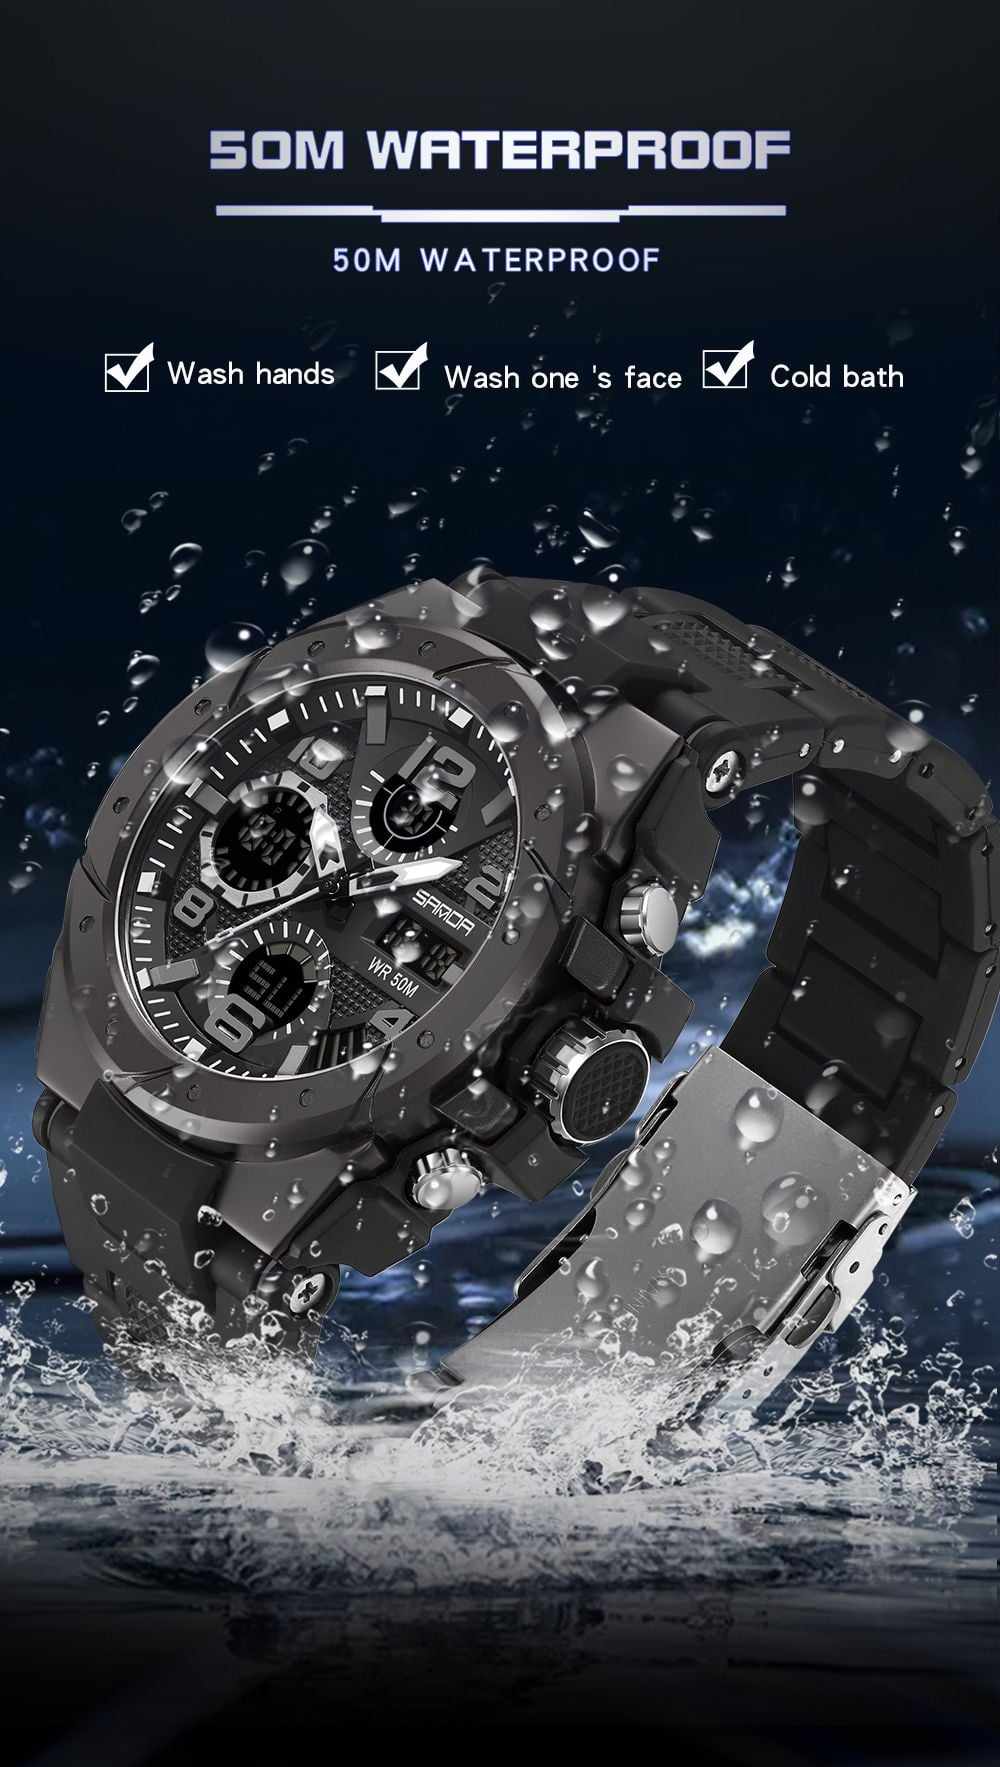 Mens Sports Watch Digital Watches Waterproof Digital Military Watches with Alarm Large Dial Watches Black Body with Blue Hand